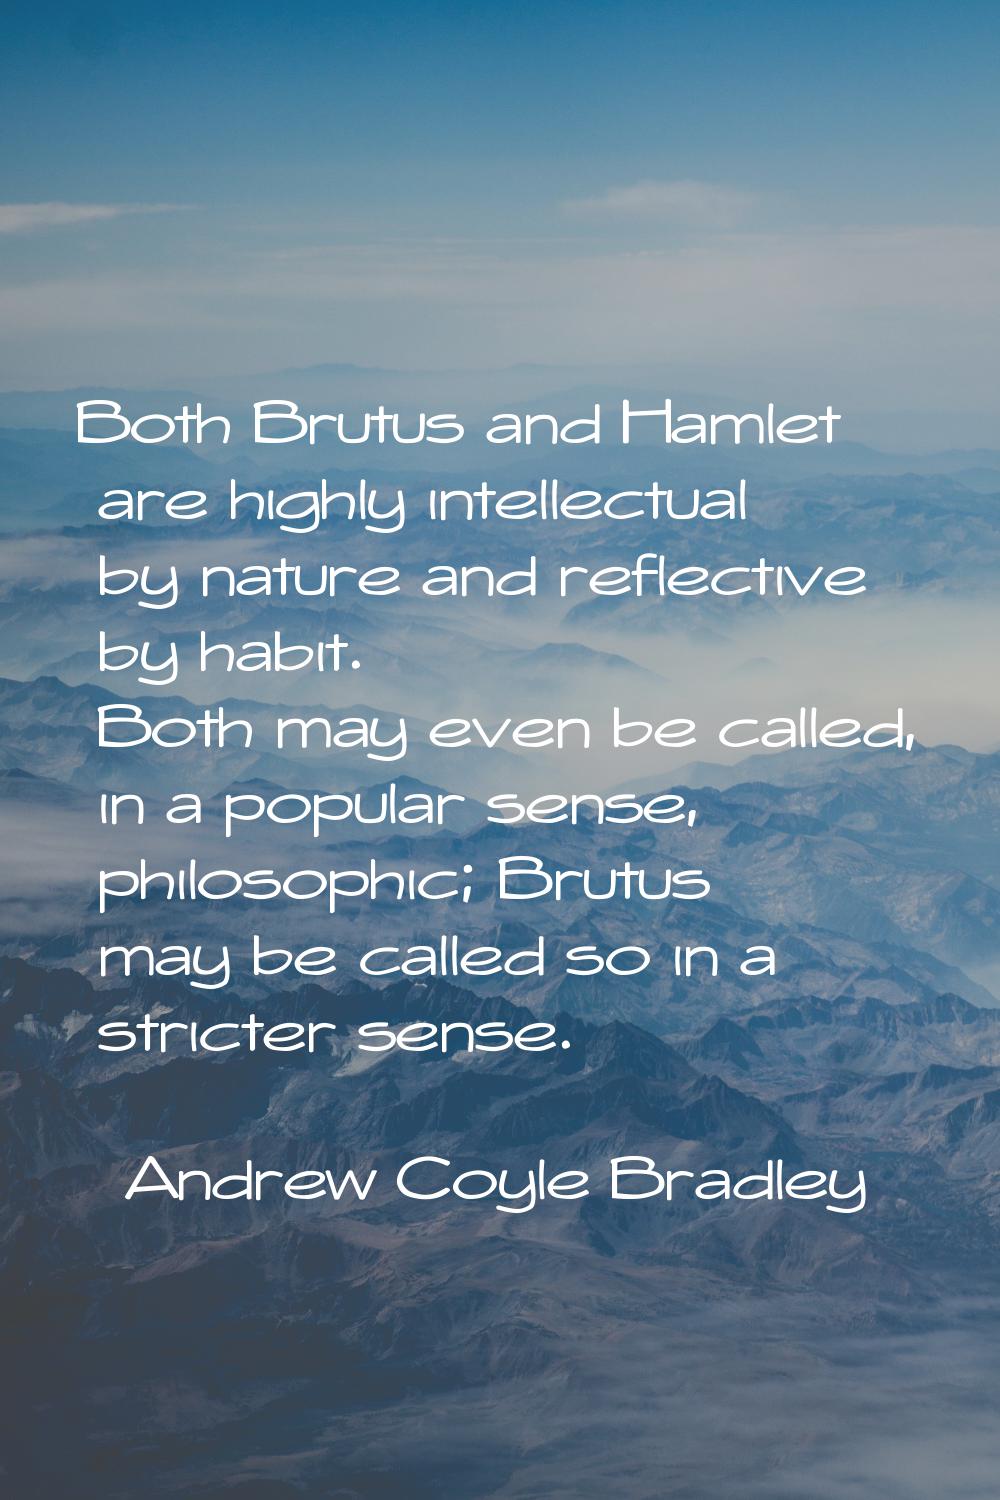 Both Brutus and Hamlet are highly intellectual by nature and reflective by habit. Both may even be 